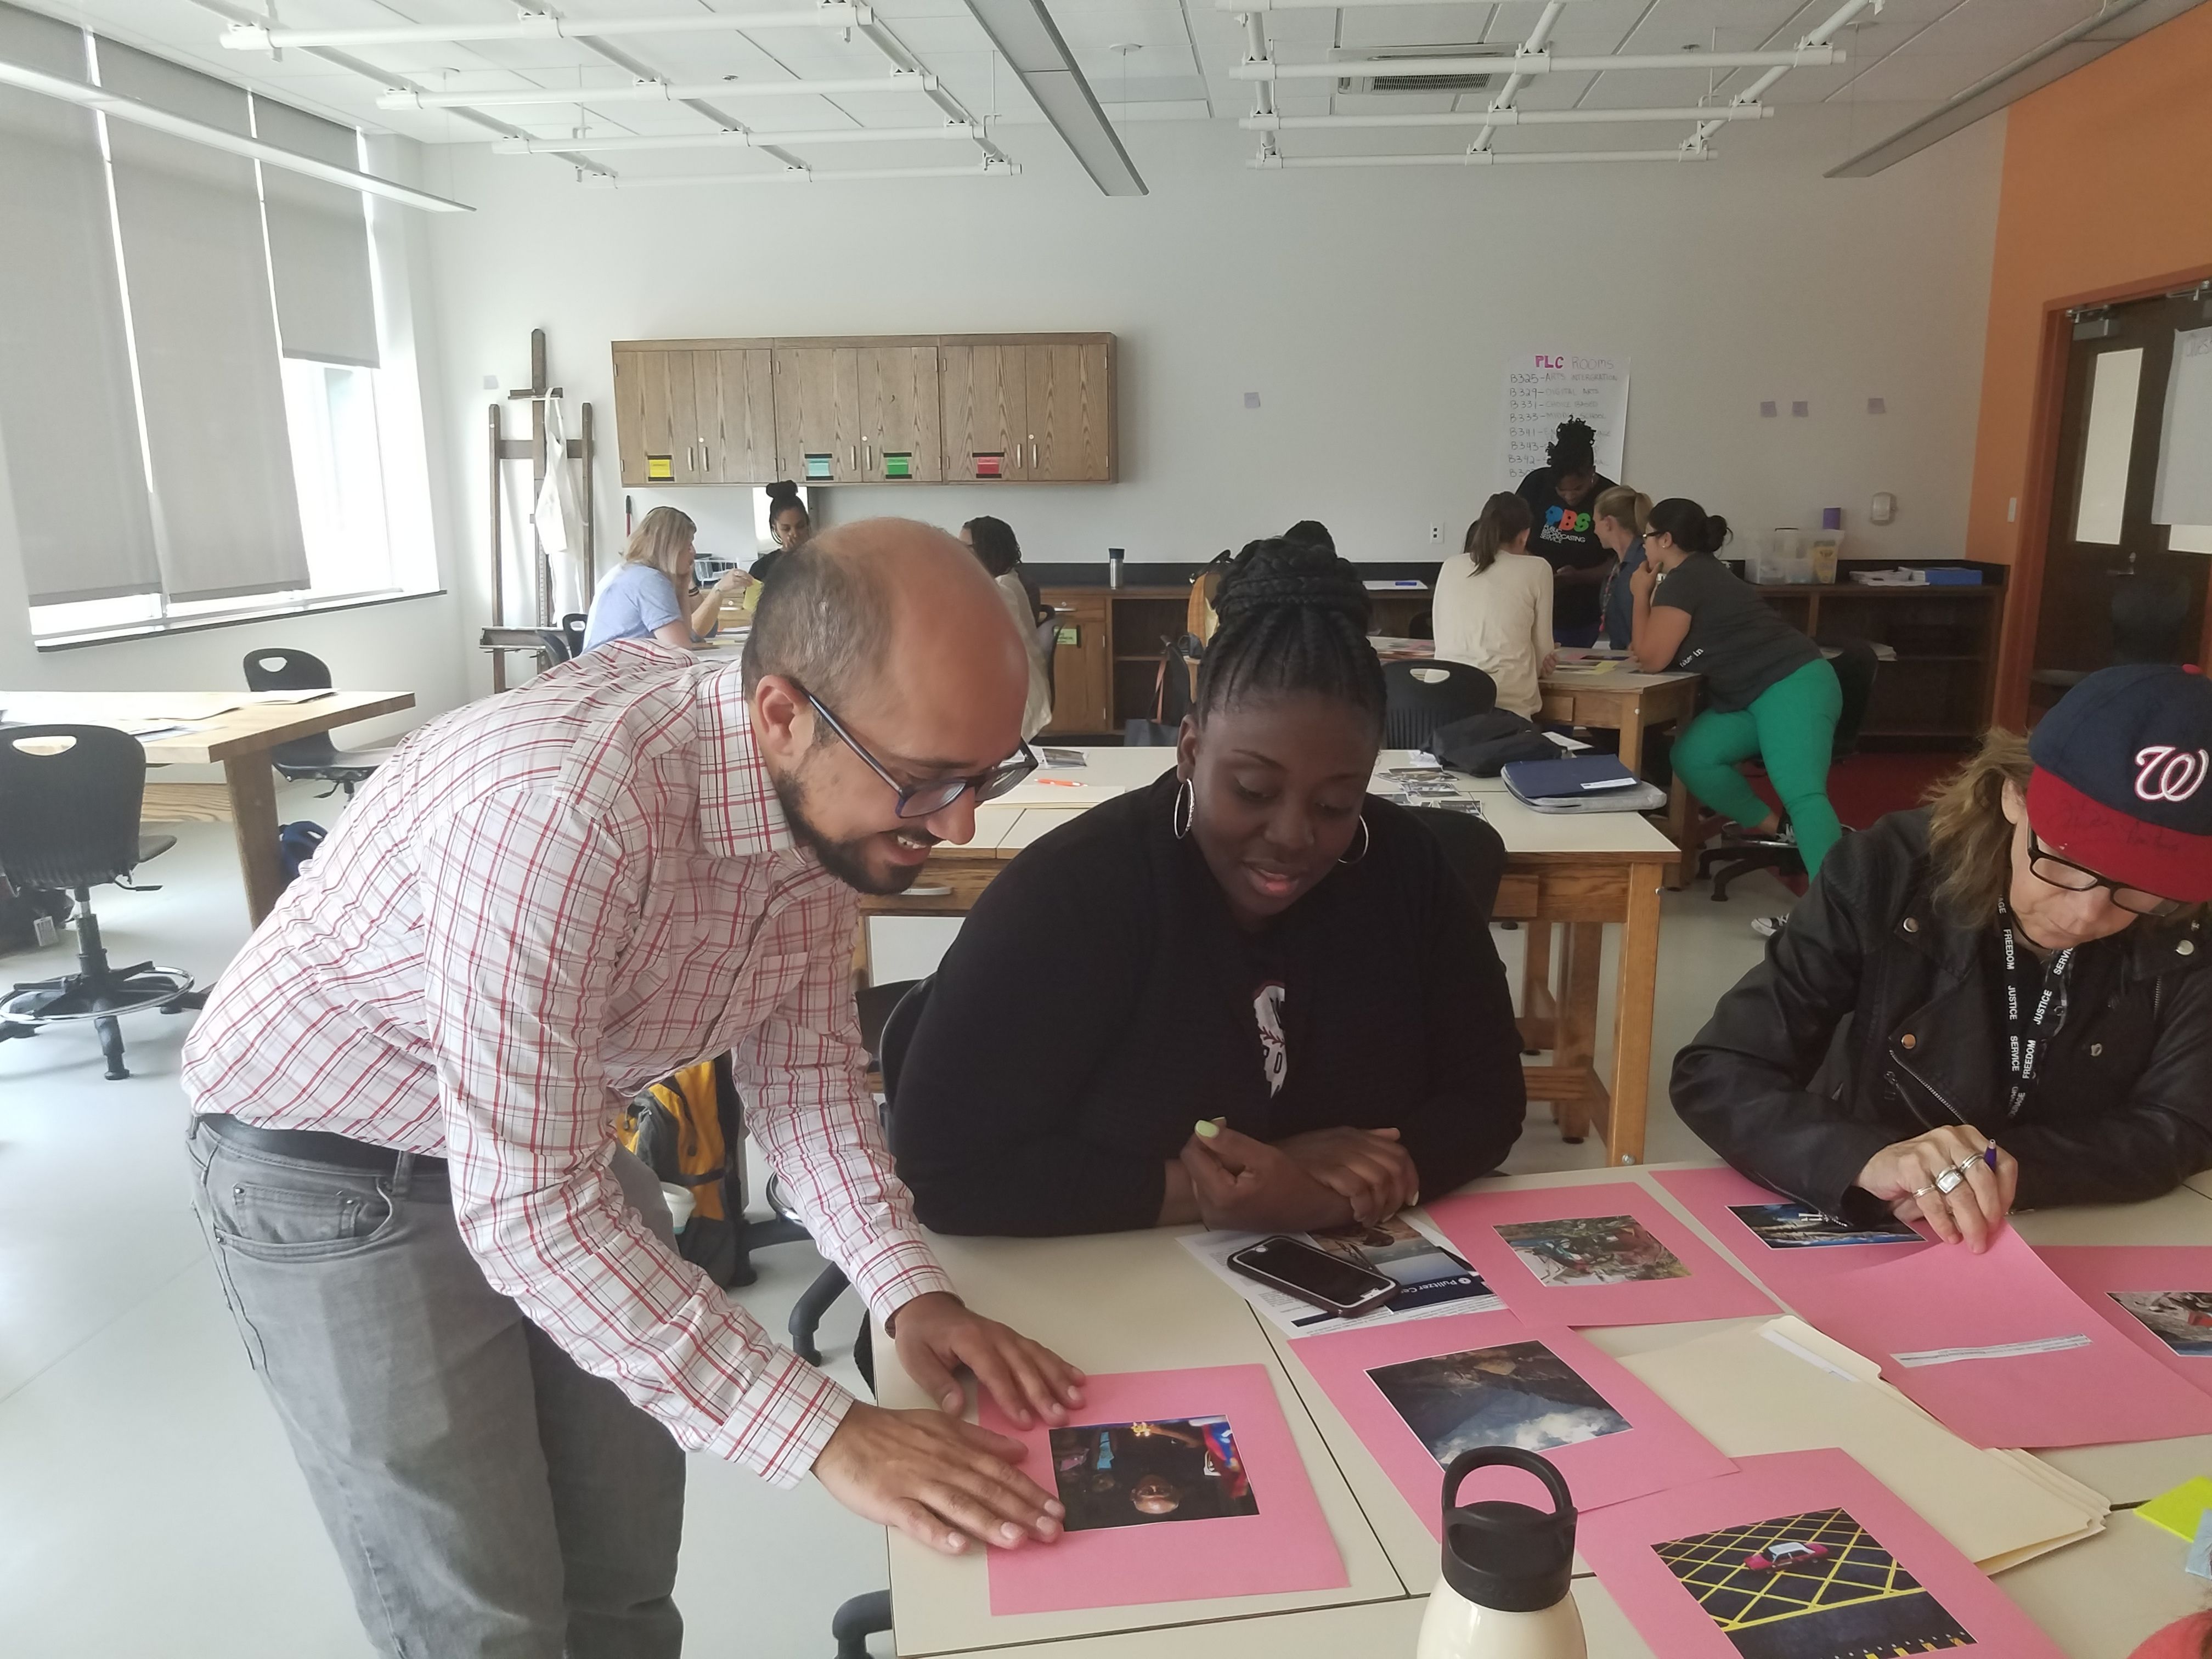 Teachers look at photos from the Everyday series as Fareed Mostoufi from the Pulitzer Center guides them through the Everyday DC unit. Image by Kayla Sharpe. United States, 2017.